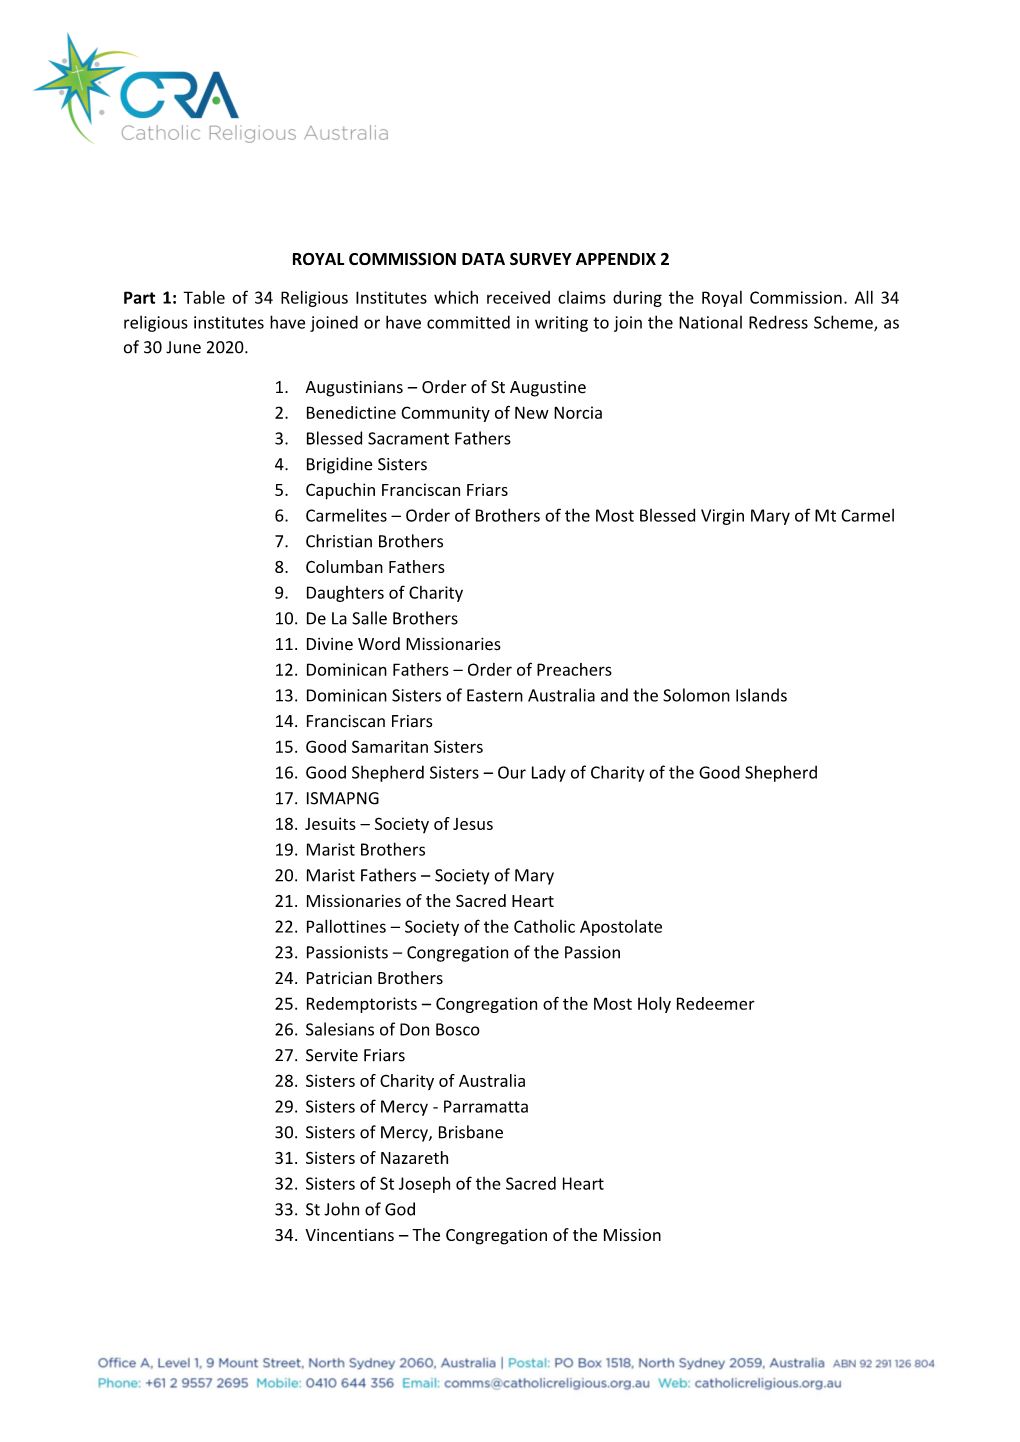 Table of 34 Religious Institutes Which Received Claims During the Royal Commission